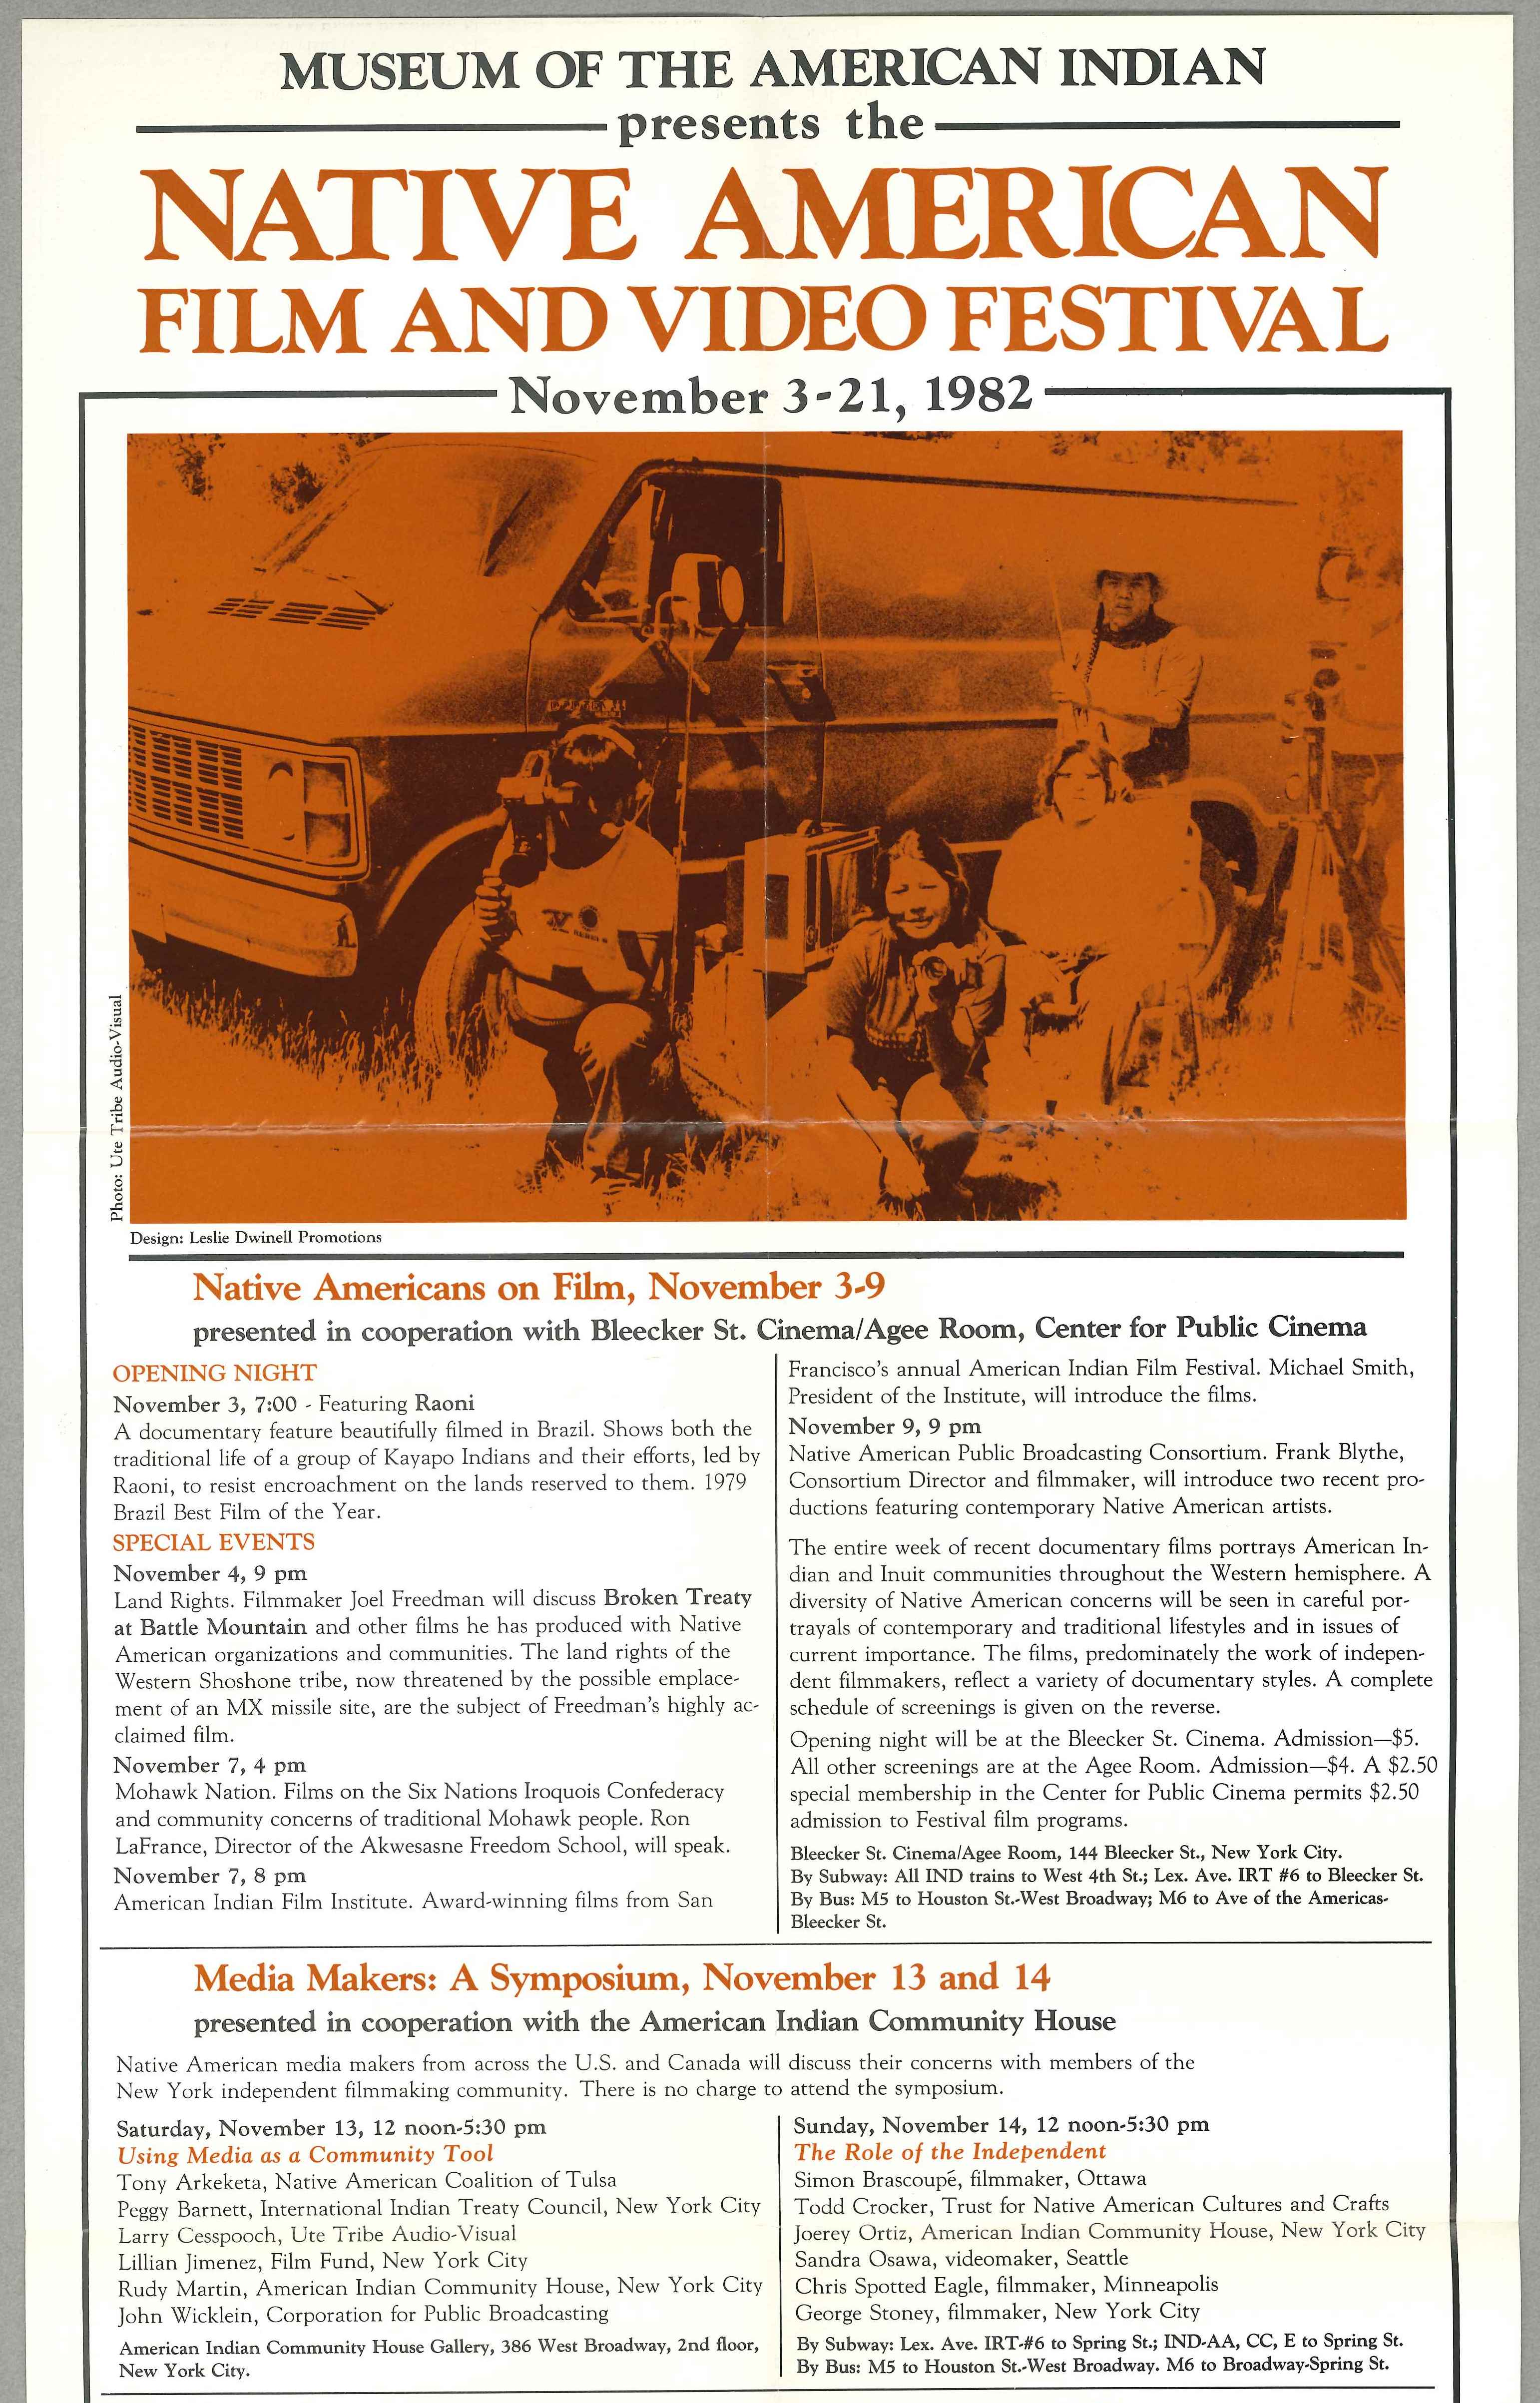 Native American Film and Video Festival program, November 3-21, 1982. Accession 17-252, Smithsonian Institution Archives.